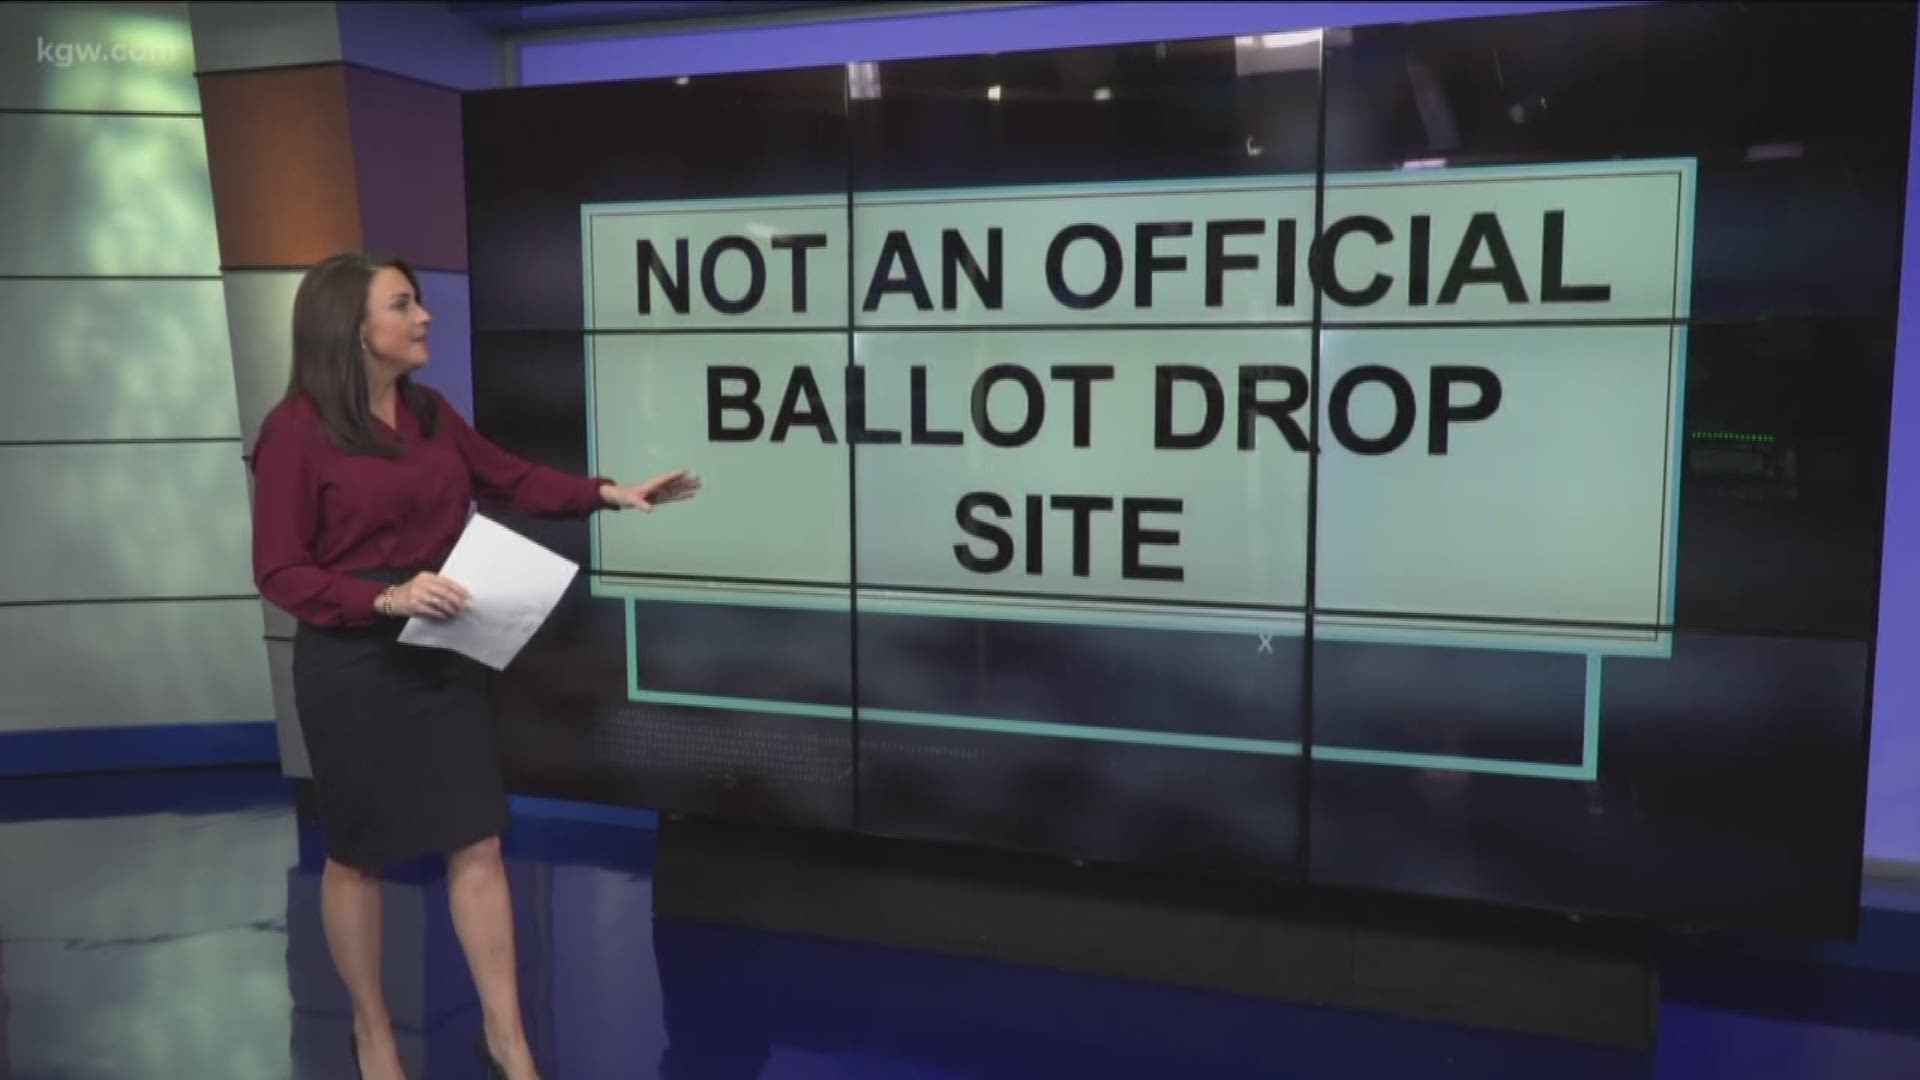 Is it legal for others to collect your ballots to drop off?